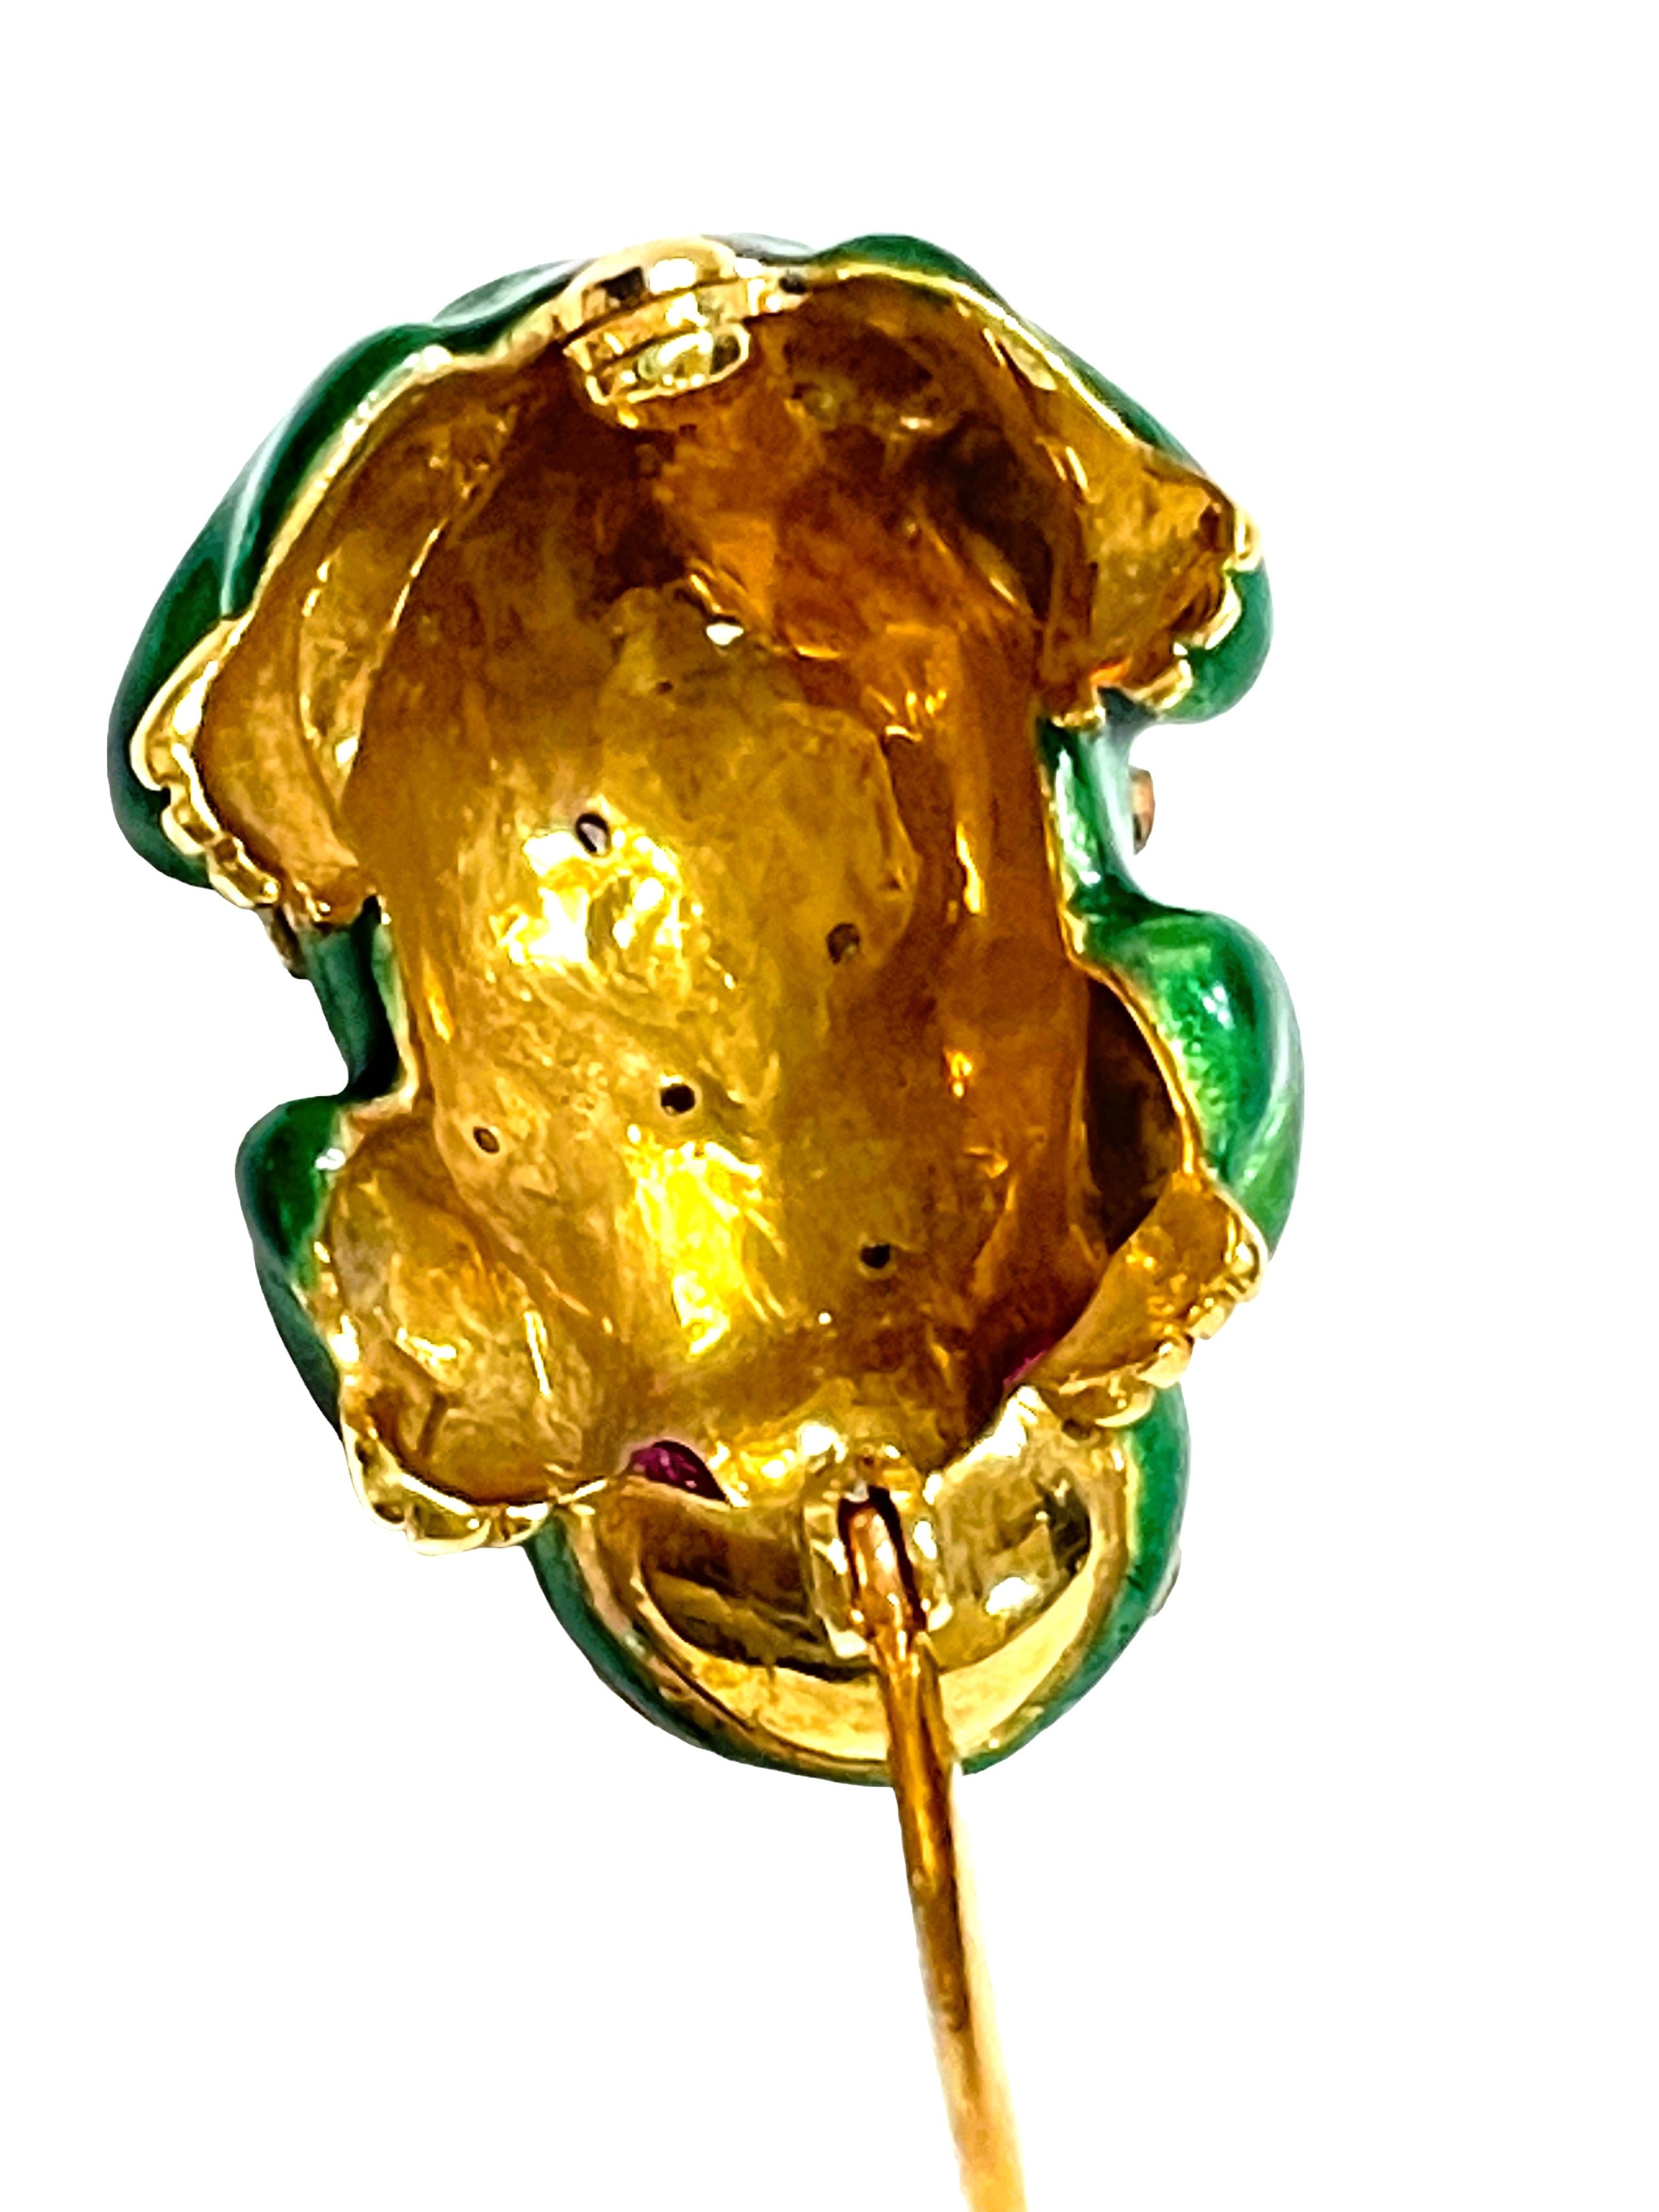 Handmade 21k Yellow Gold Enamel Frog Pin/Pedant with Ruby Eyes and Diamond Bumps 2